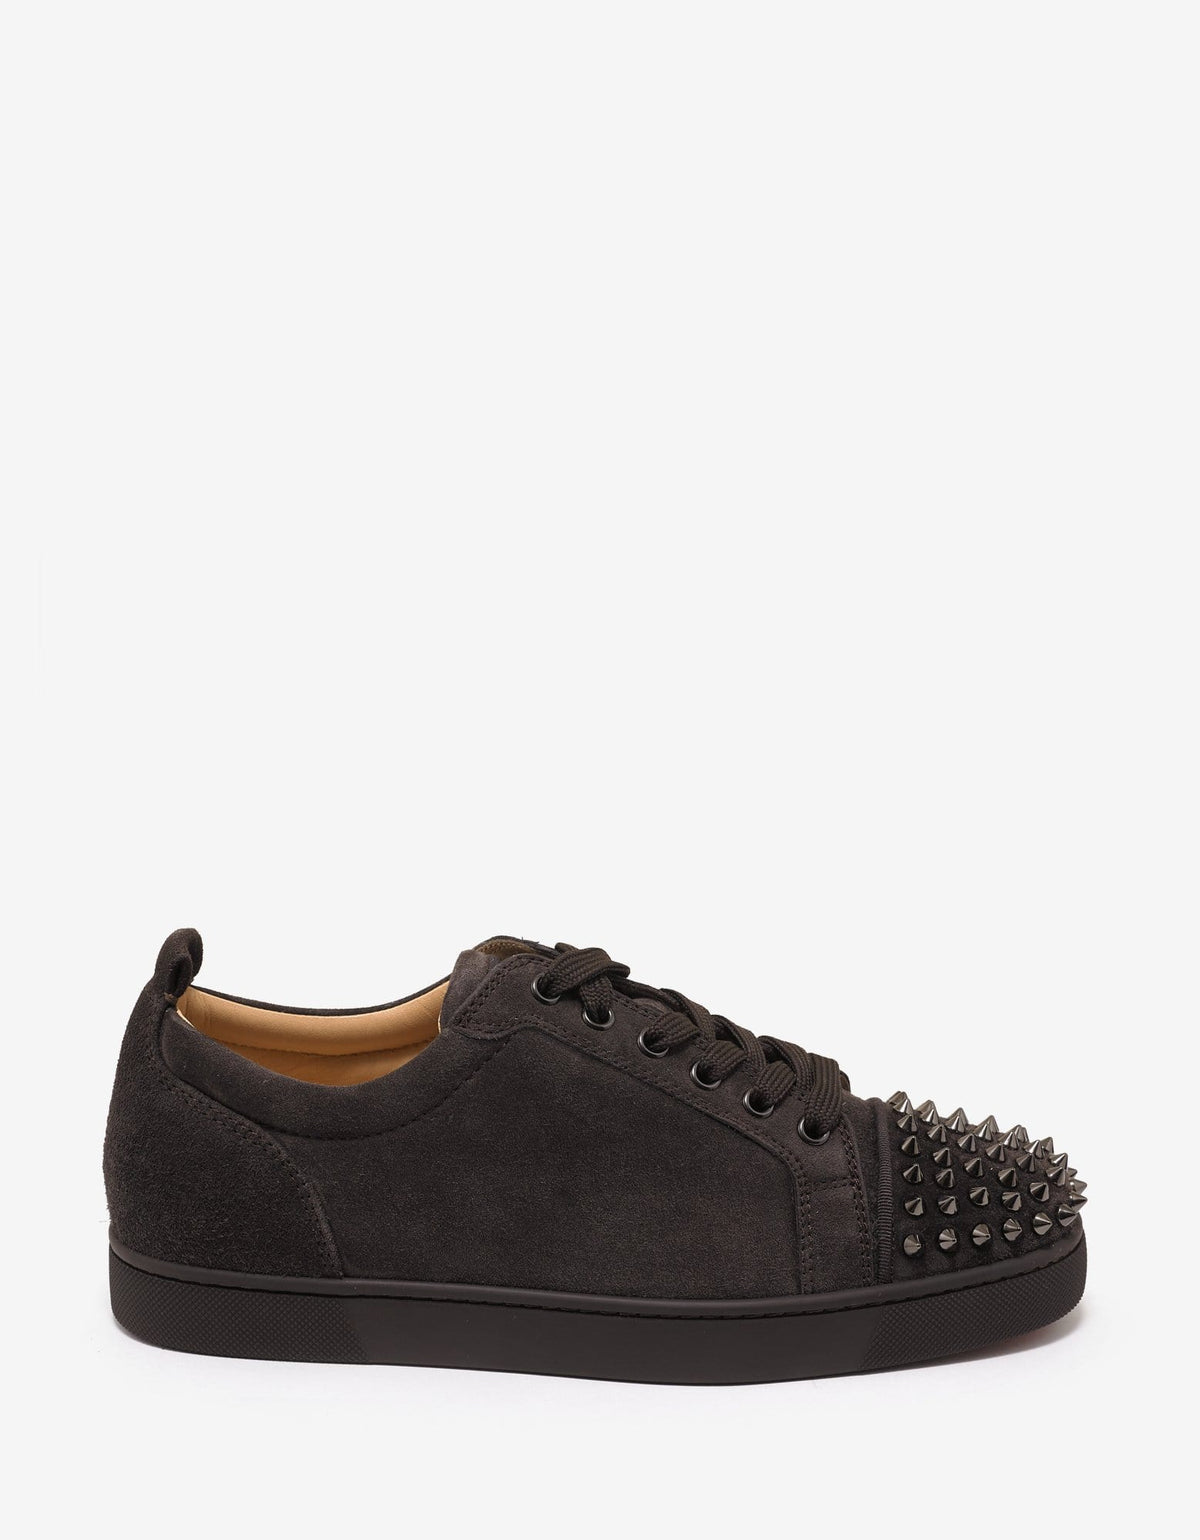 Christian Louboutin - Louis Junior Spikes Flat Réglisse Brown Suede Trainers -